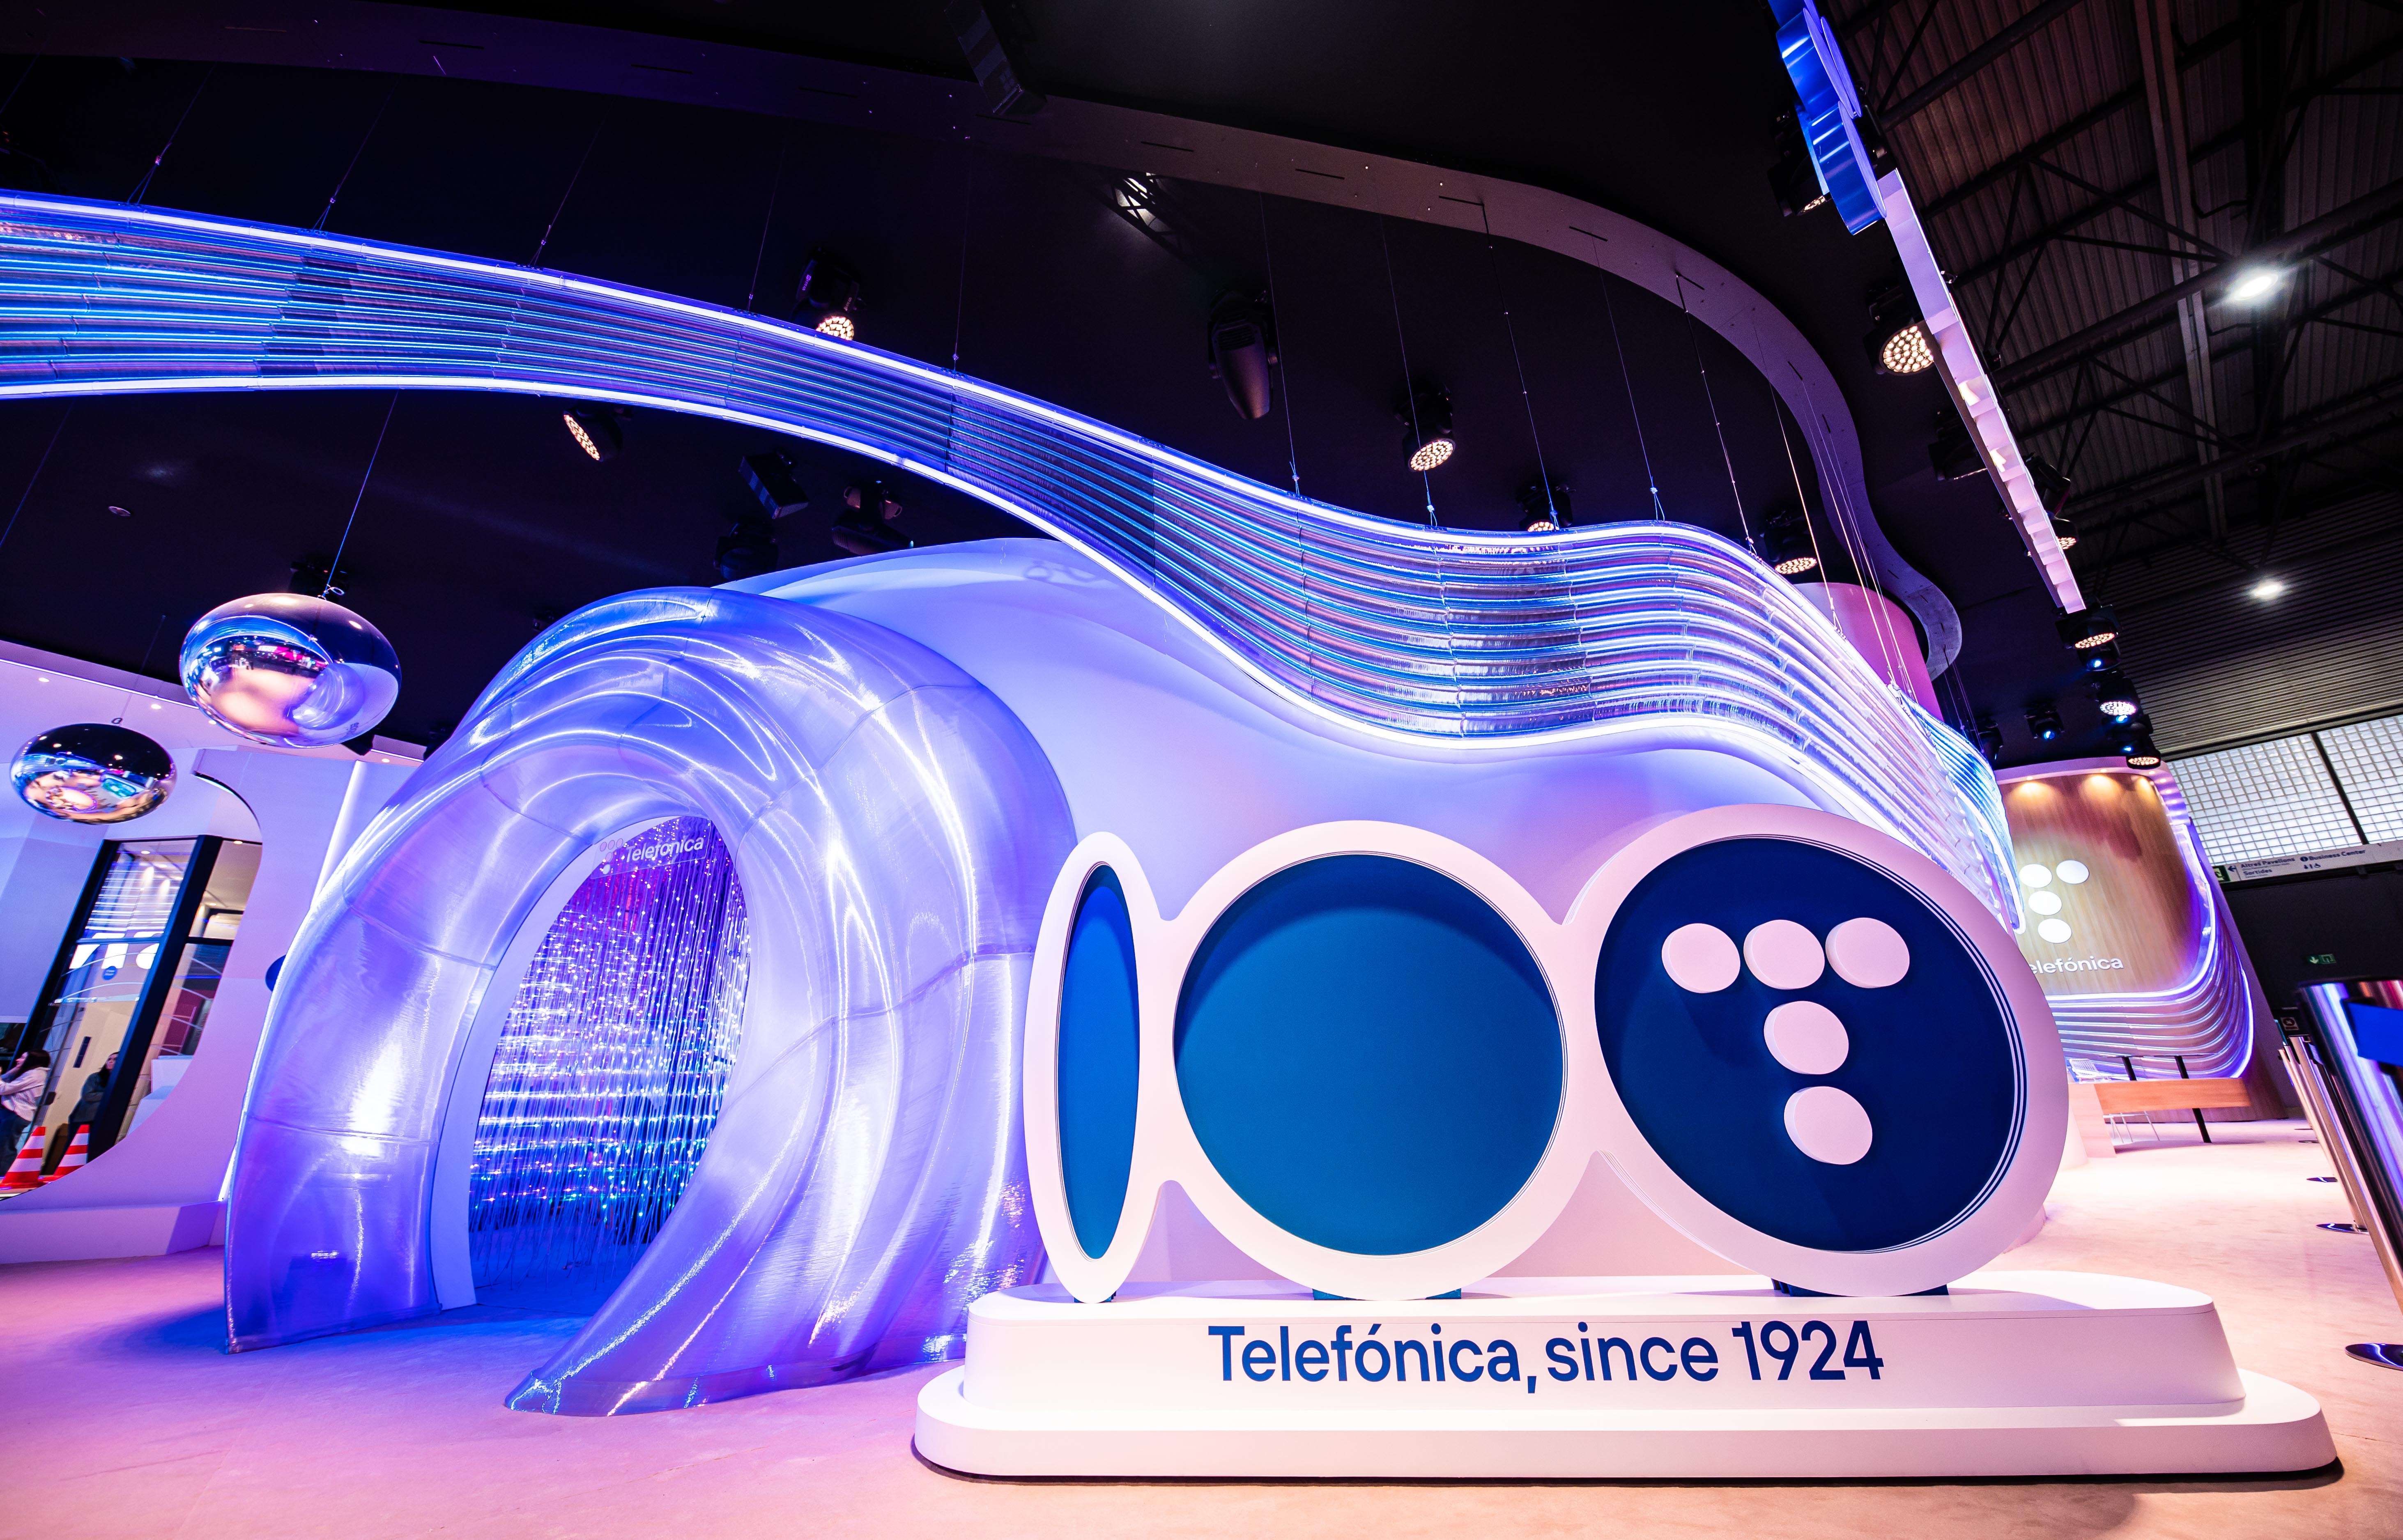 The heart of the Telefónica pavilion at MWC becomes an immersive experience.